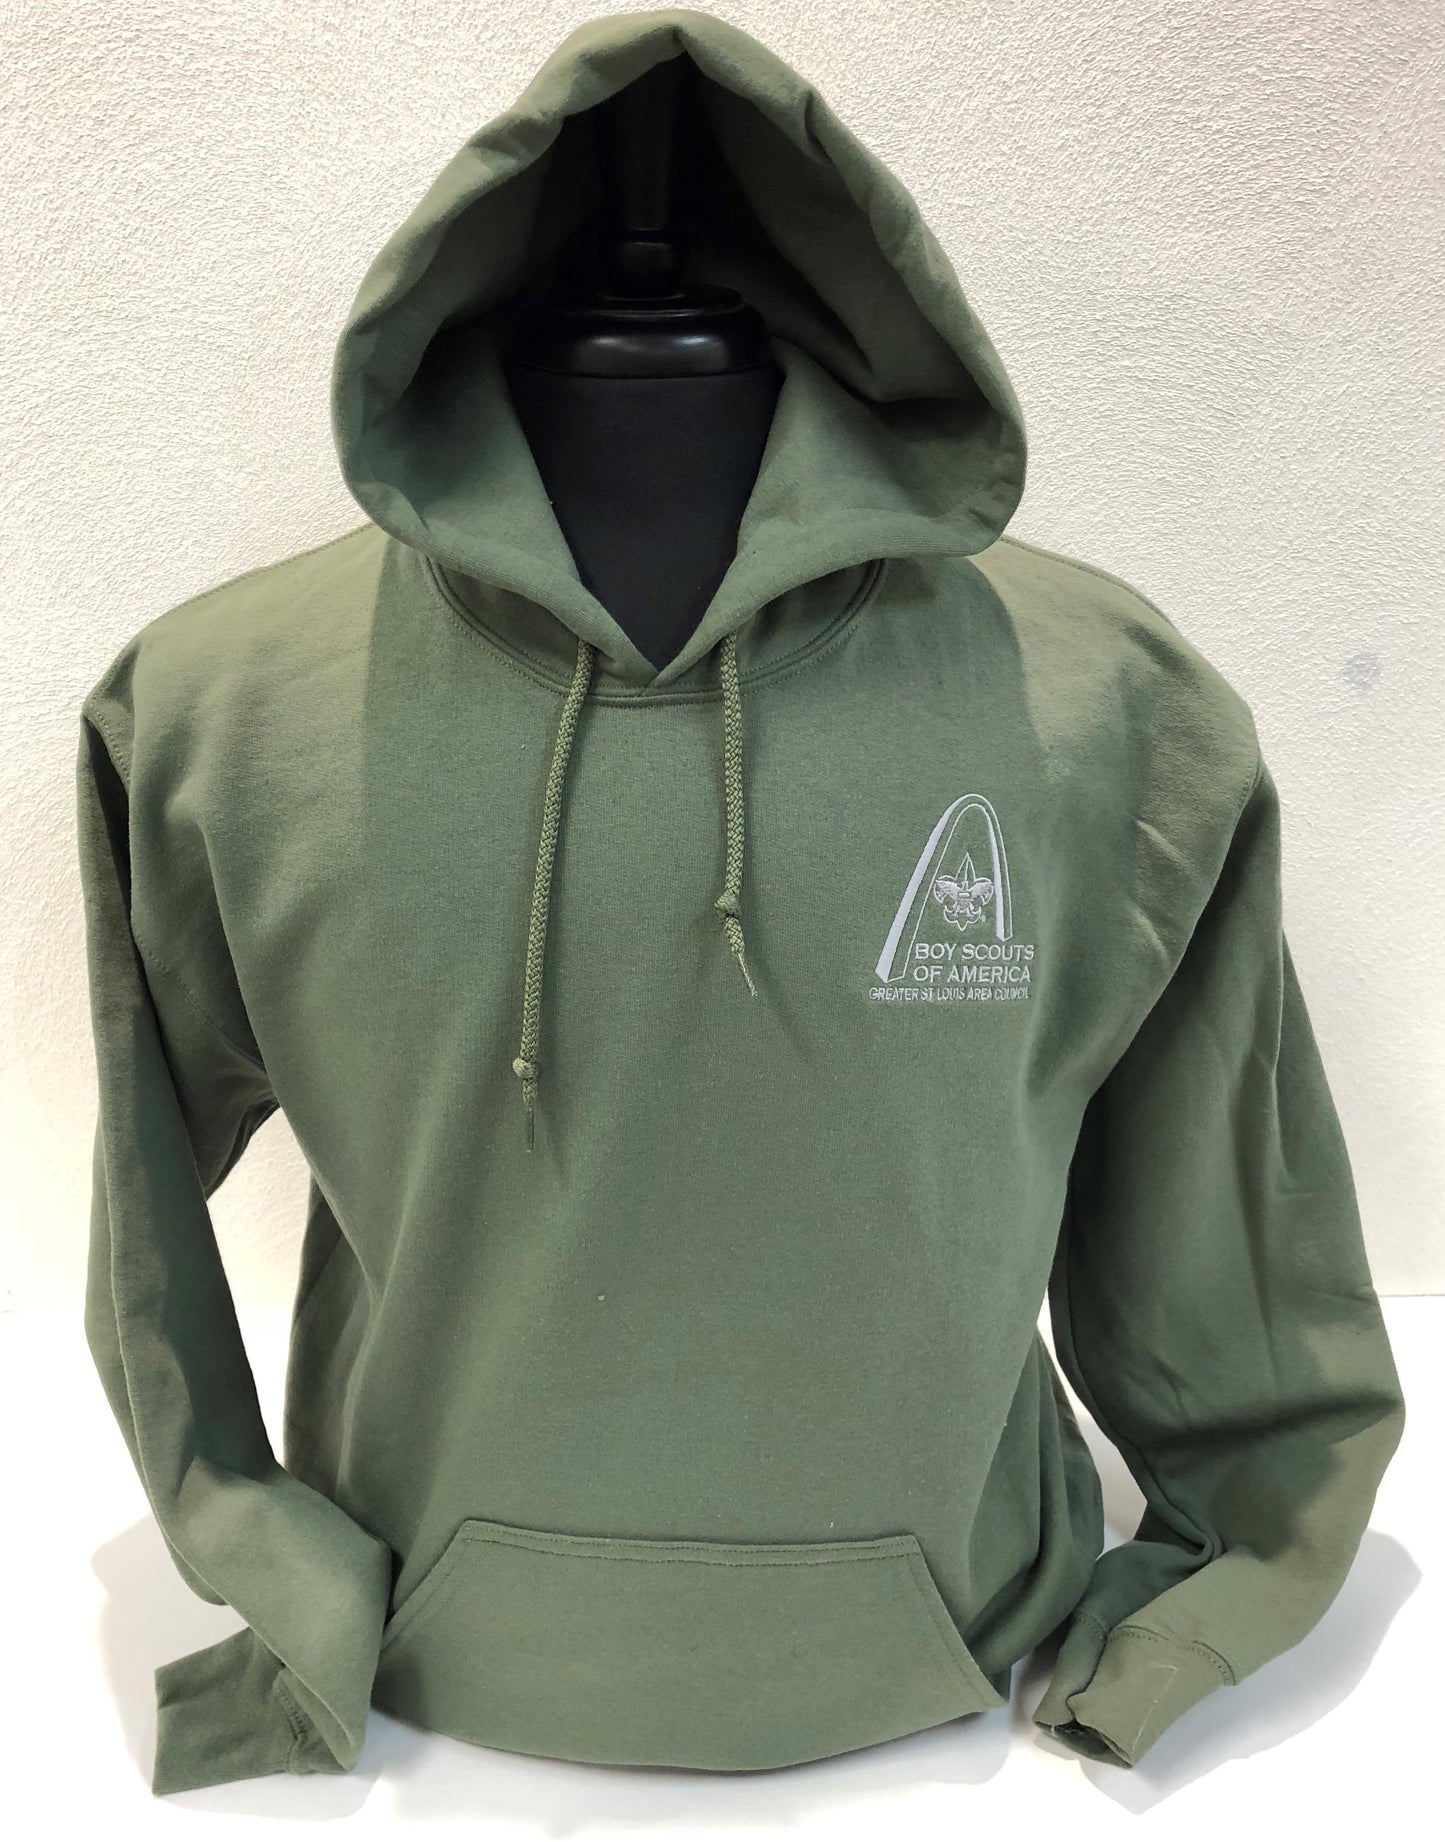 Hoodie - GSLAC Arch - Men's Military Green - Embroidered Logo